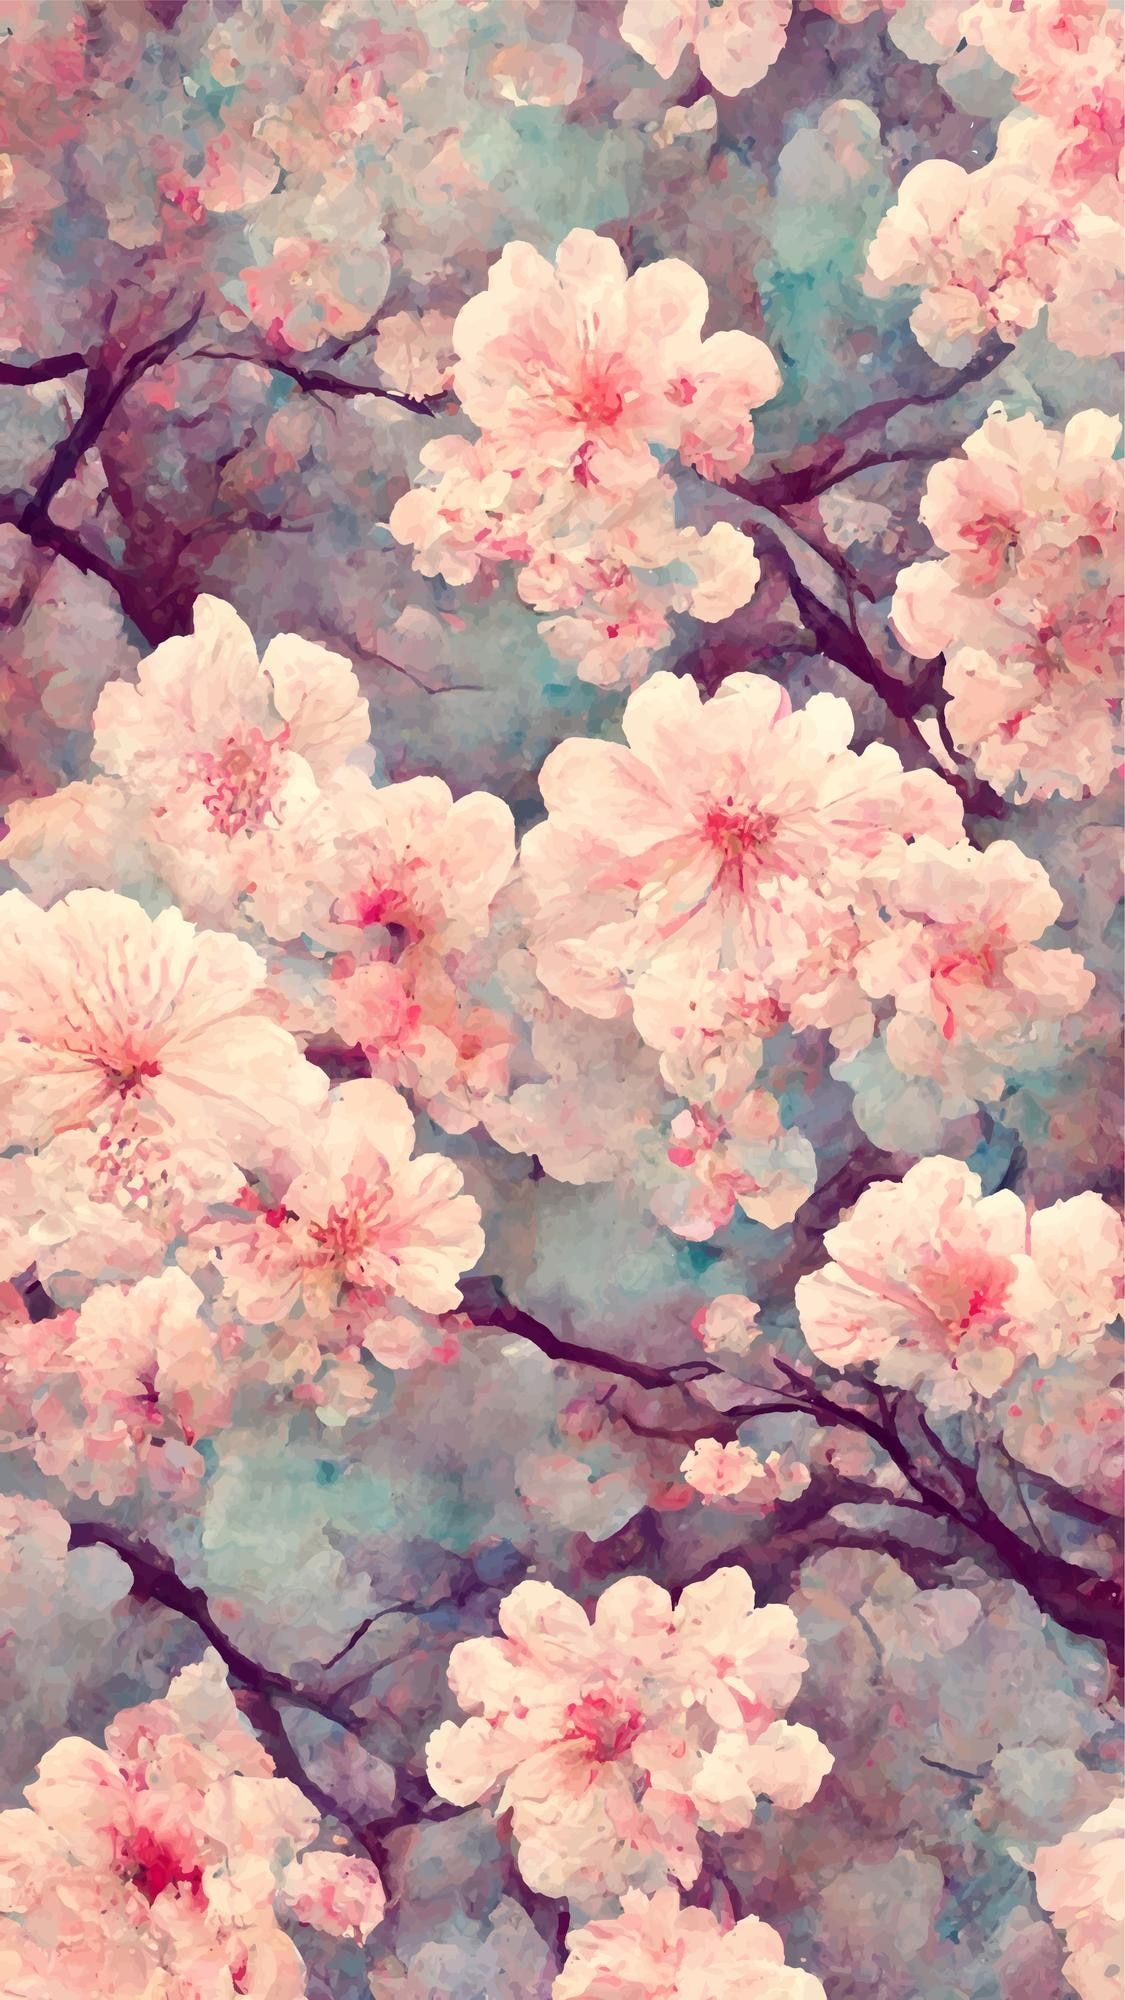 A watercolor painting of pink flowers on branches - Cherry blossom